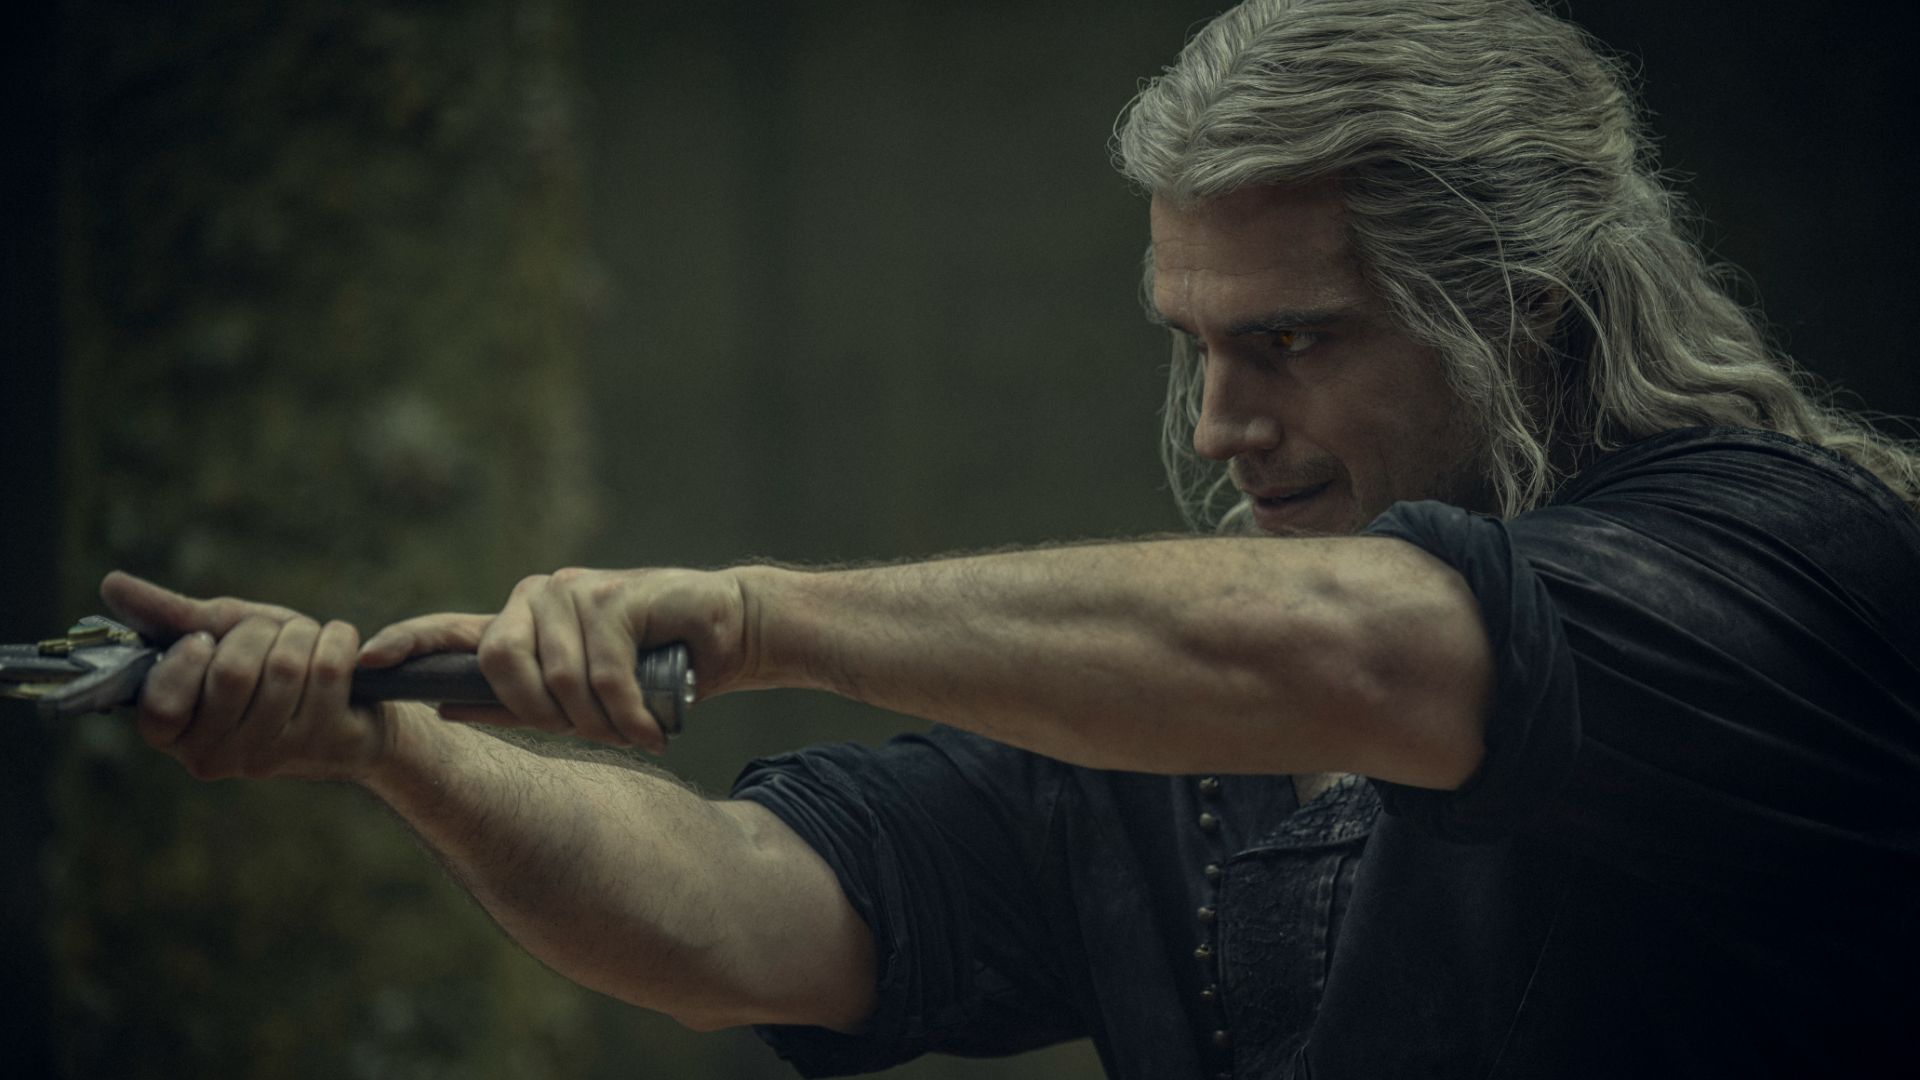 Henry Cavill & 'The Witcher' Cast on Bringing the Books to Life on Netflix  (VIDEO)